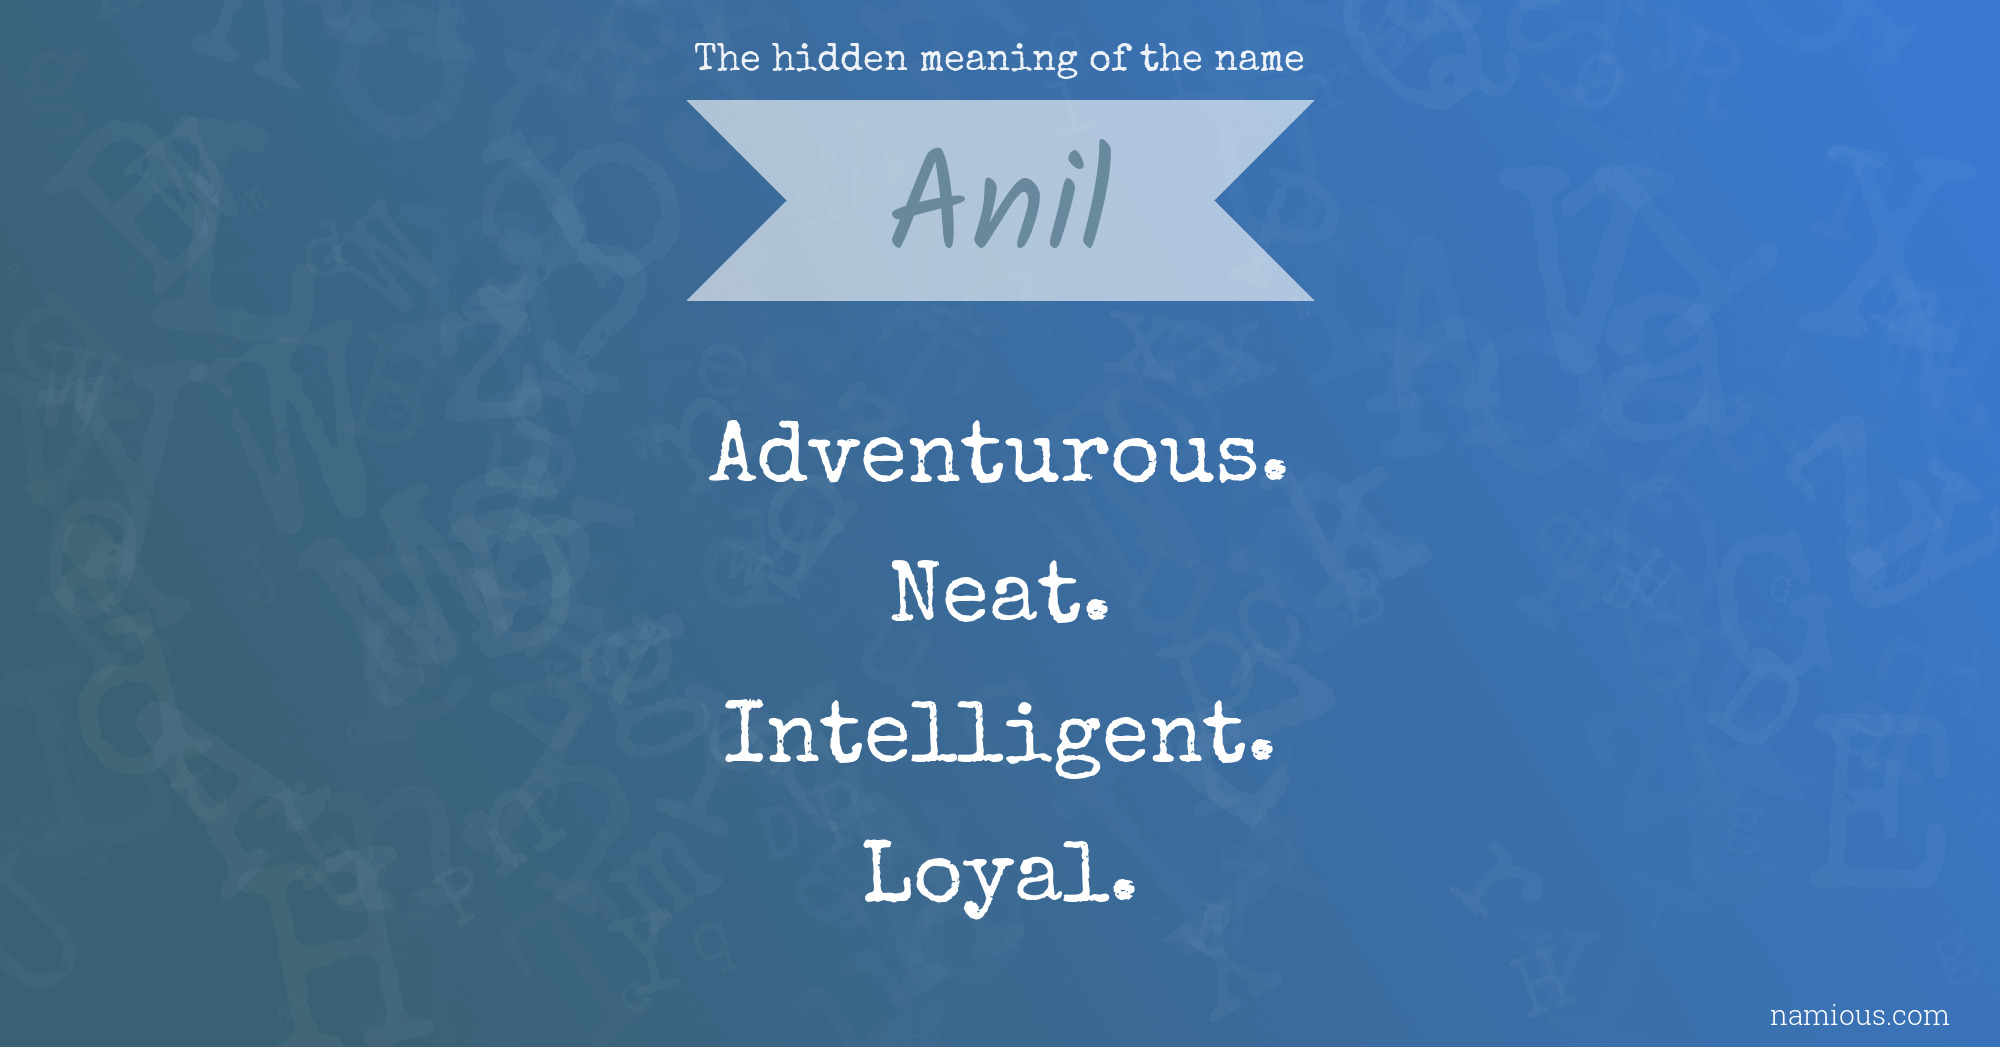 The hidden meaning of the name Anil